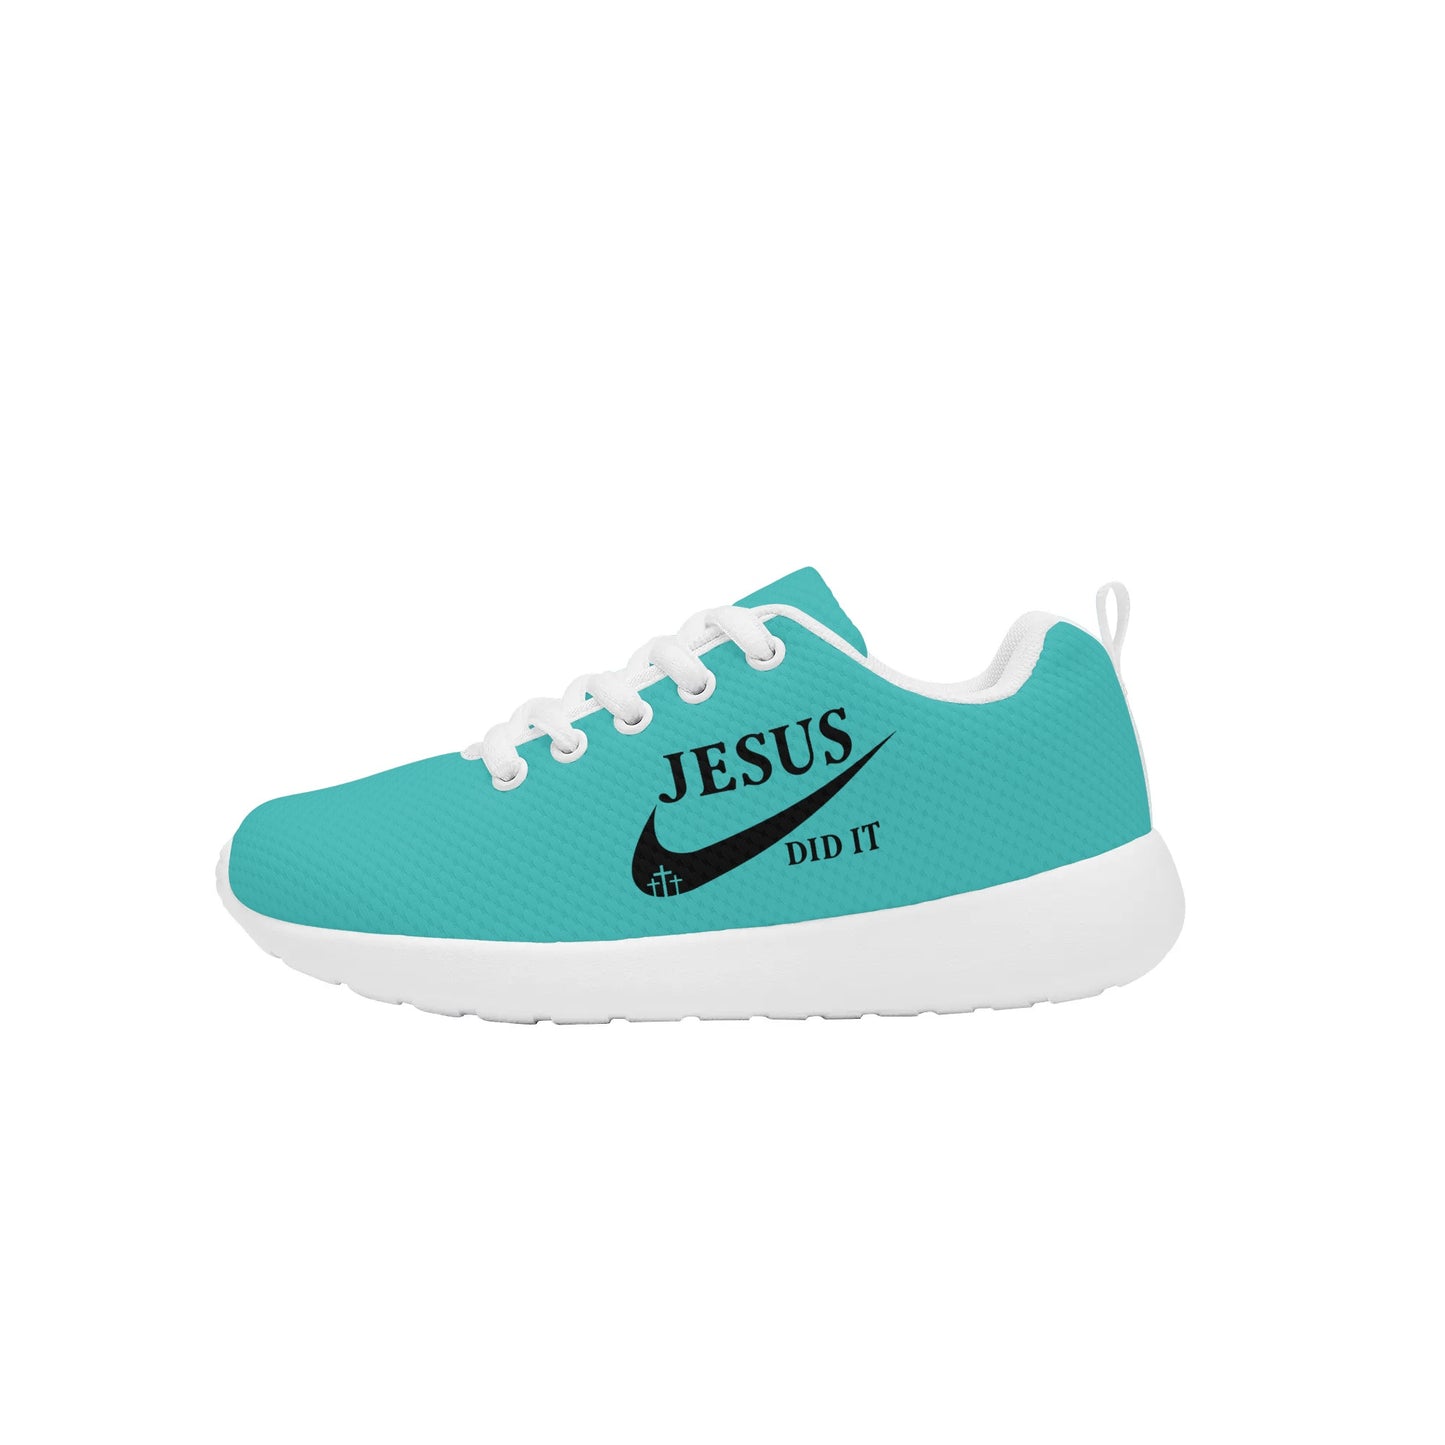 Jesus Did It (Like Nike) Kids Lace-up Athletic Christian Sneakers popcustoms